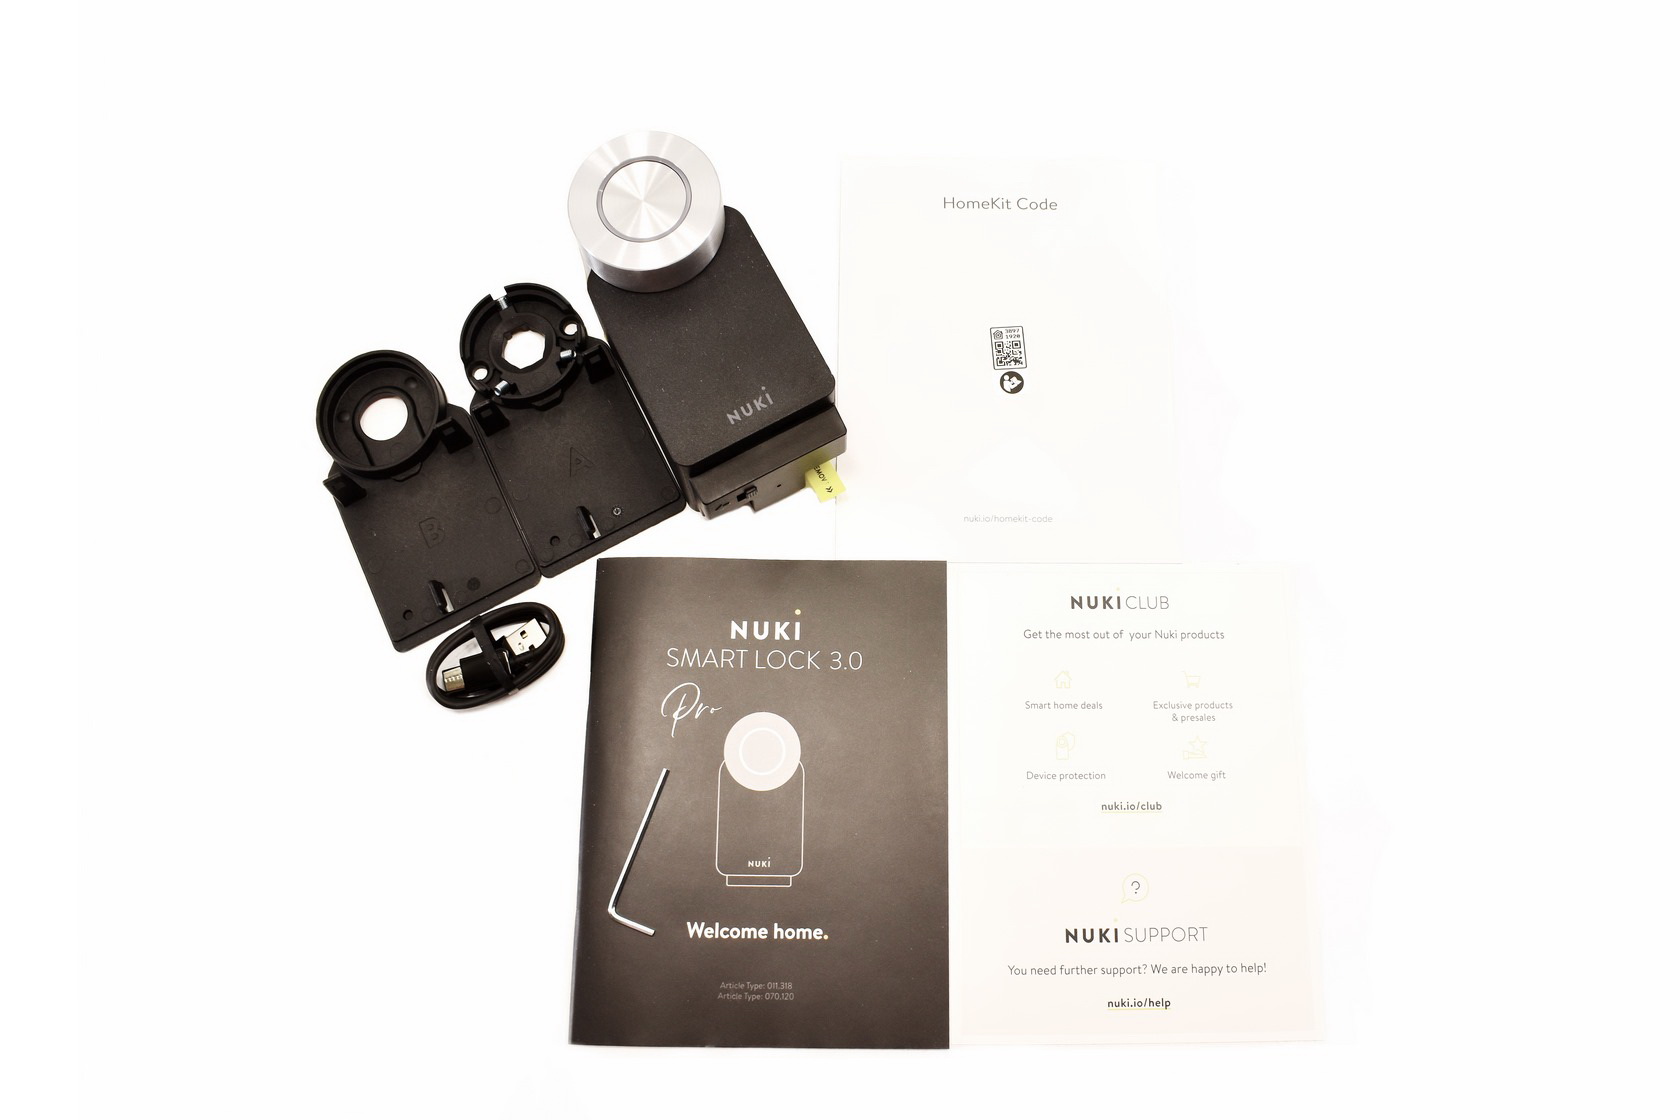 Nuki presents the Smart Lock 3.0 and 3.0 Pro + other product